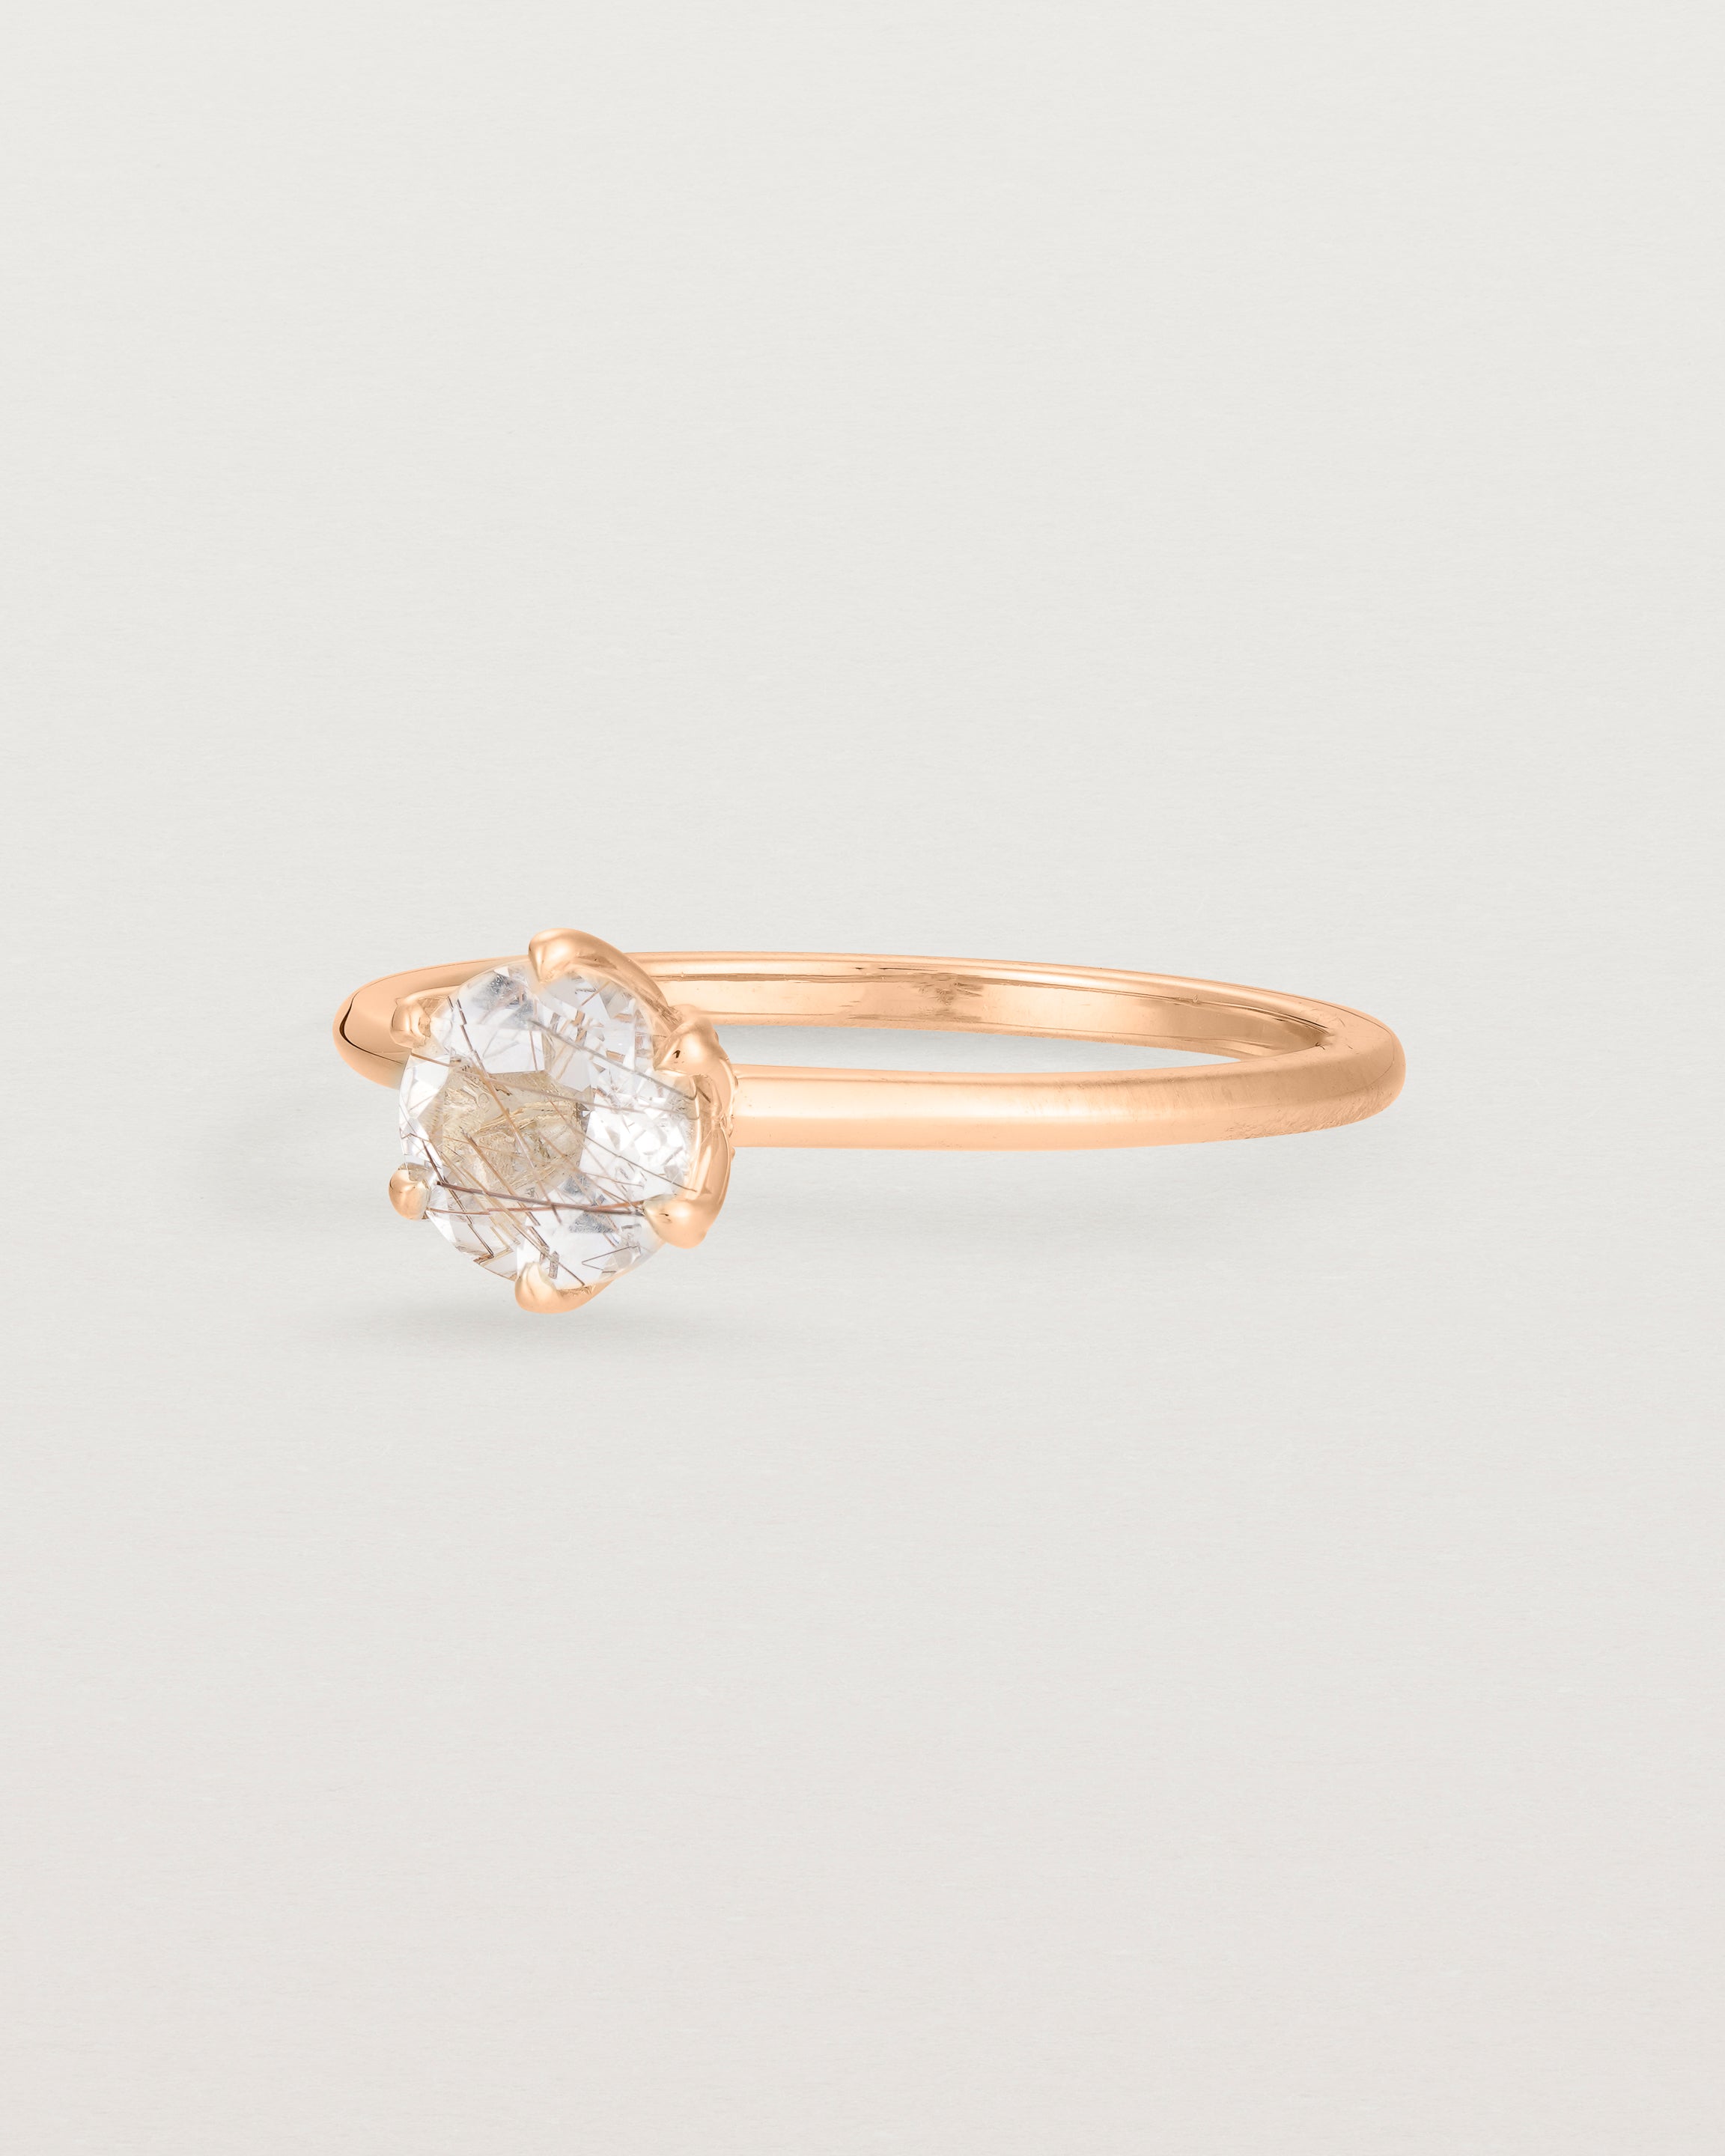 Angled view of the Mandala Solitaire Ring | Rutilated Quartz & Diamonds | Rose Gold.